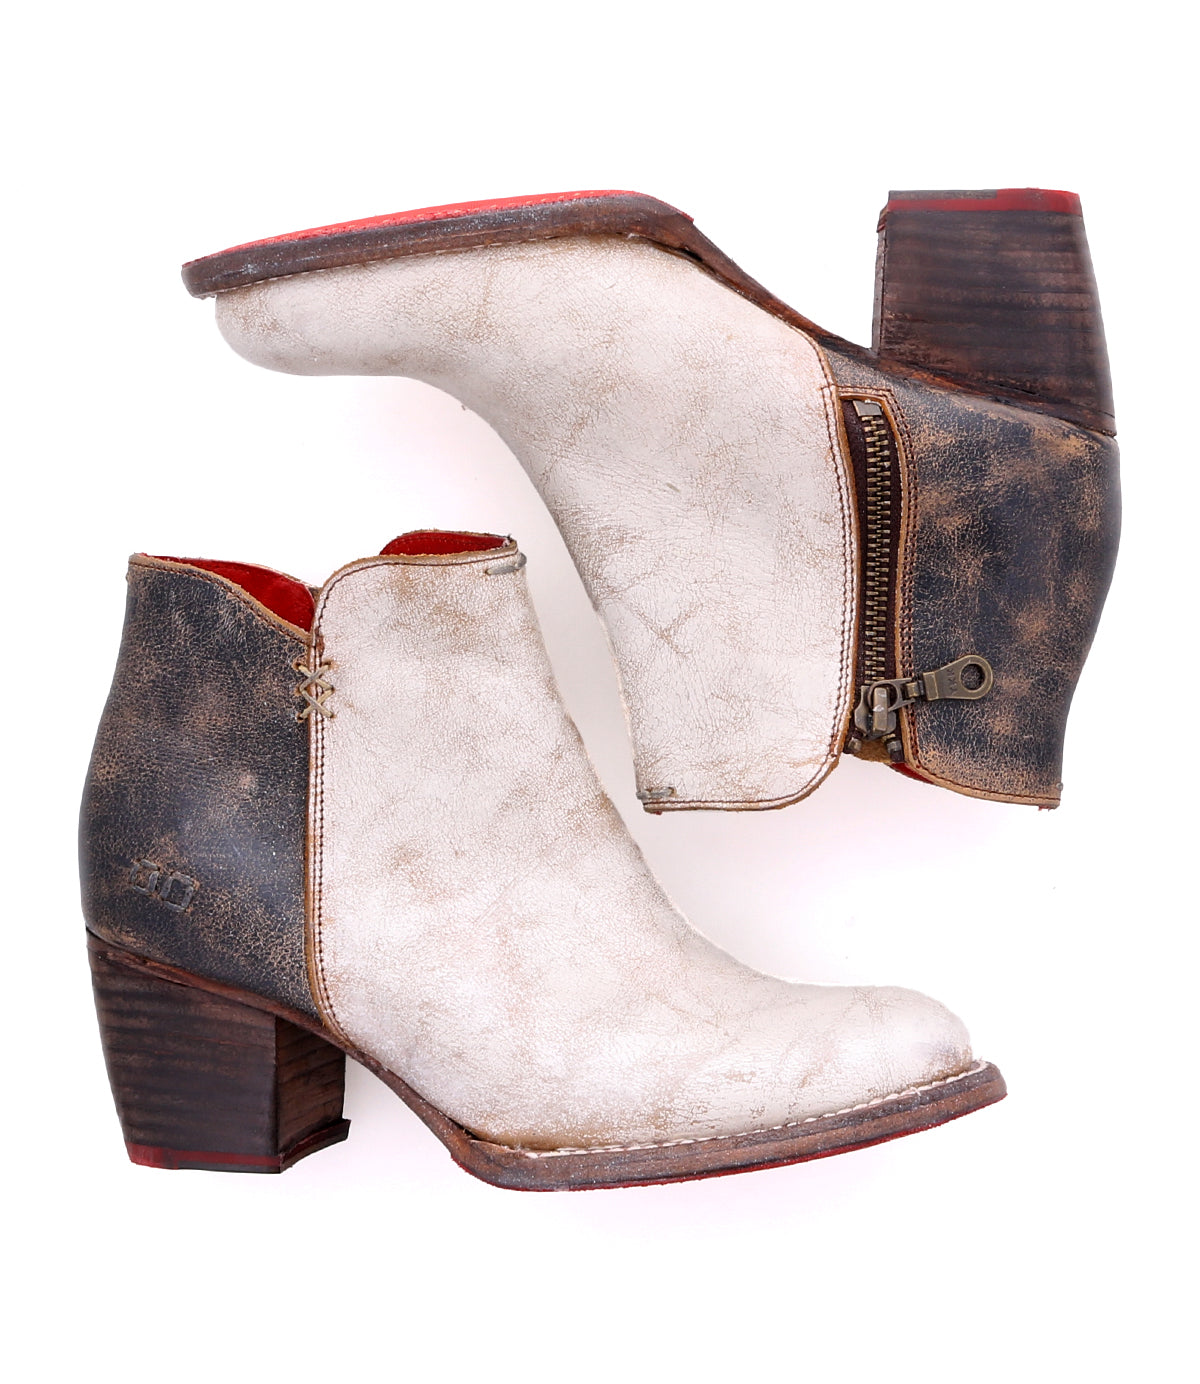 A pair of durable Bed Stu white leather ankle boots on a white background.